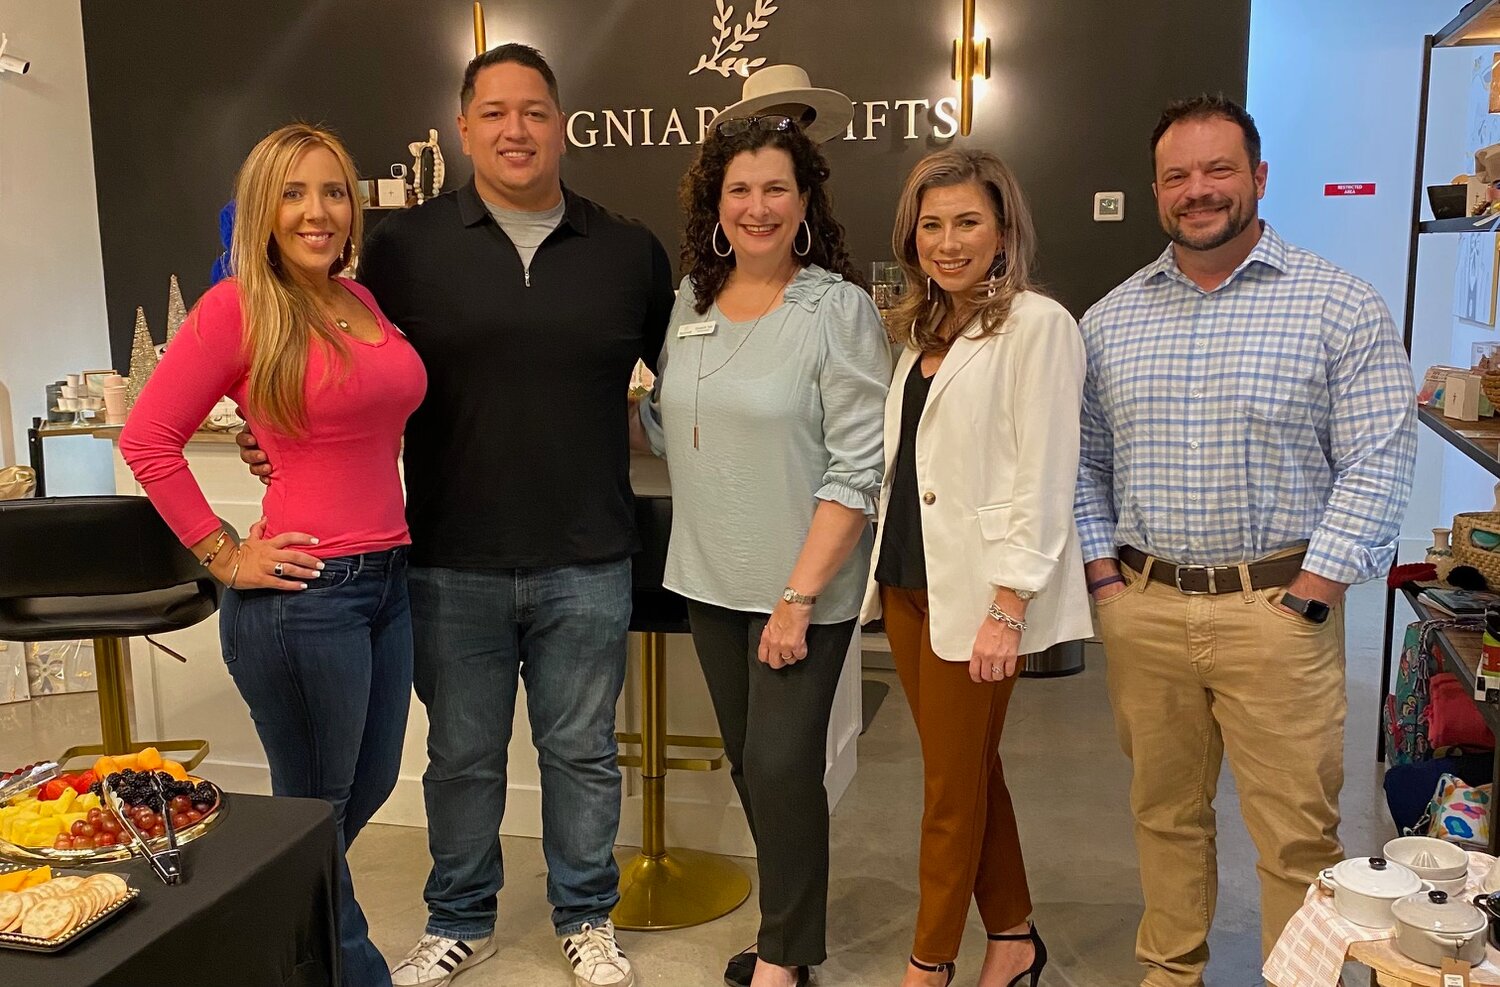 Members of the Gluckstadt Madison Business Alliance pose for a picture at a recent event. Pictured, from left, are Jeanie Robinson (Lagniappe Gifts), Jose Hernandez (River Oaks Roofing), Elizabeth Tyler (GMBA Executive Director) Brooke Howard (Citizens National Bank), and Michael Petyak (Oakmont Financial Partners).